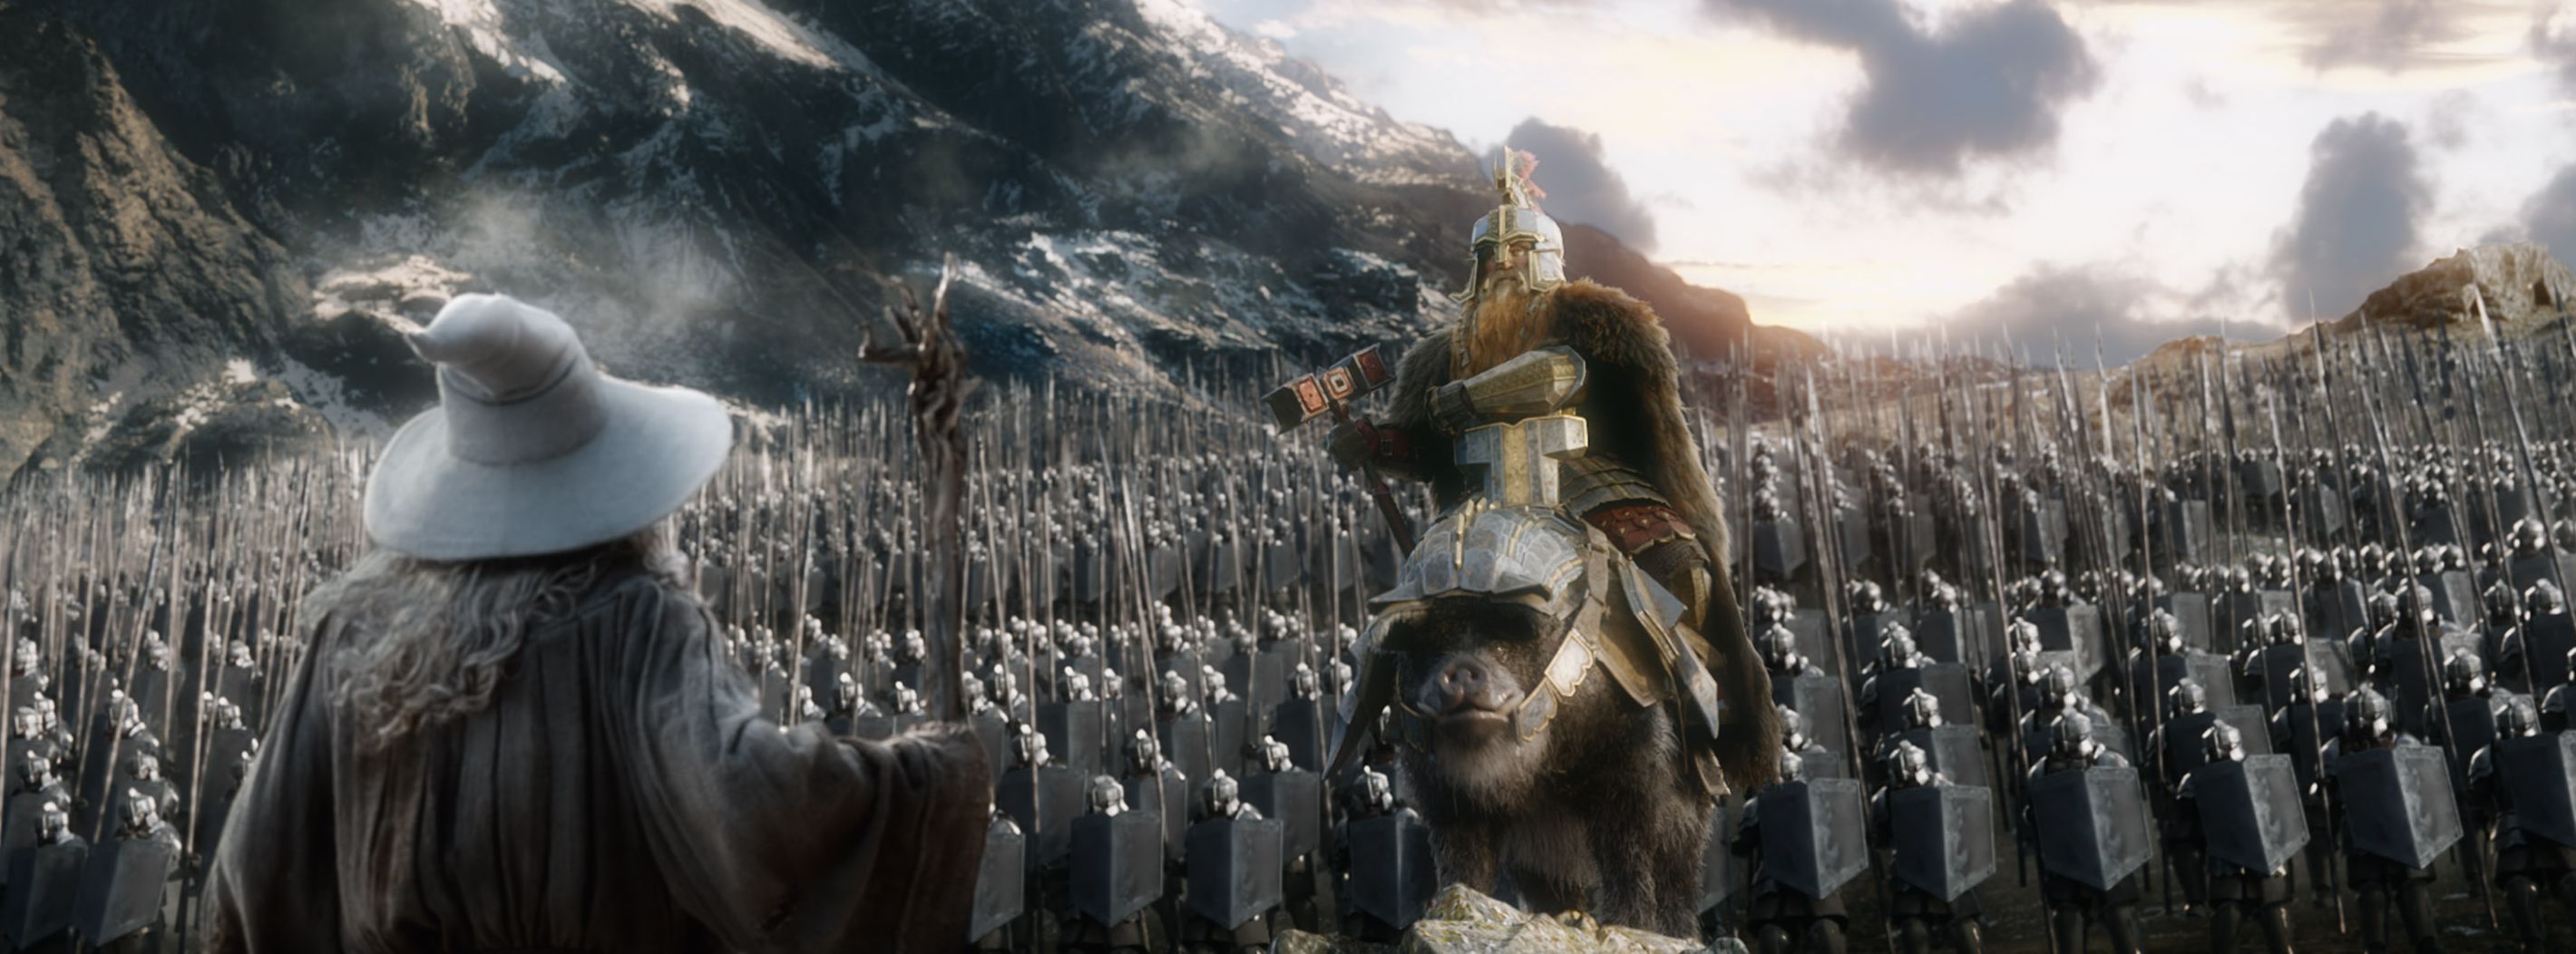 Huge army in The Hobbit: The Battle of the Five Armies